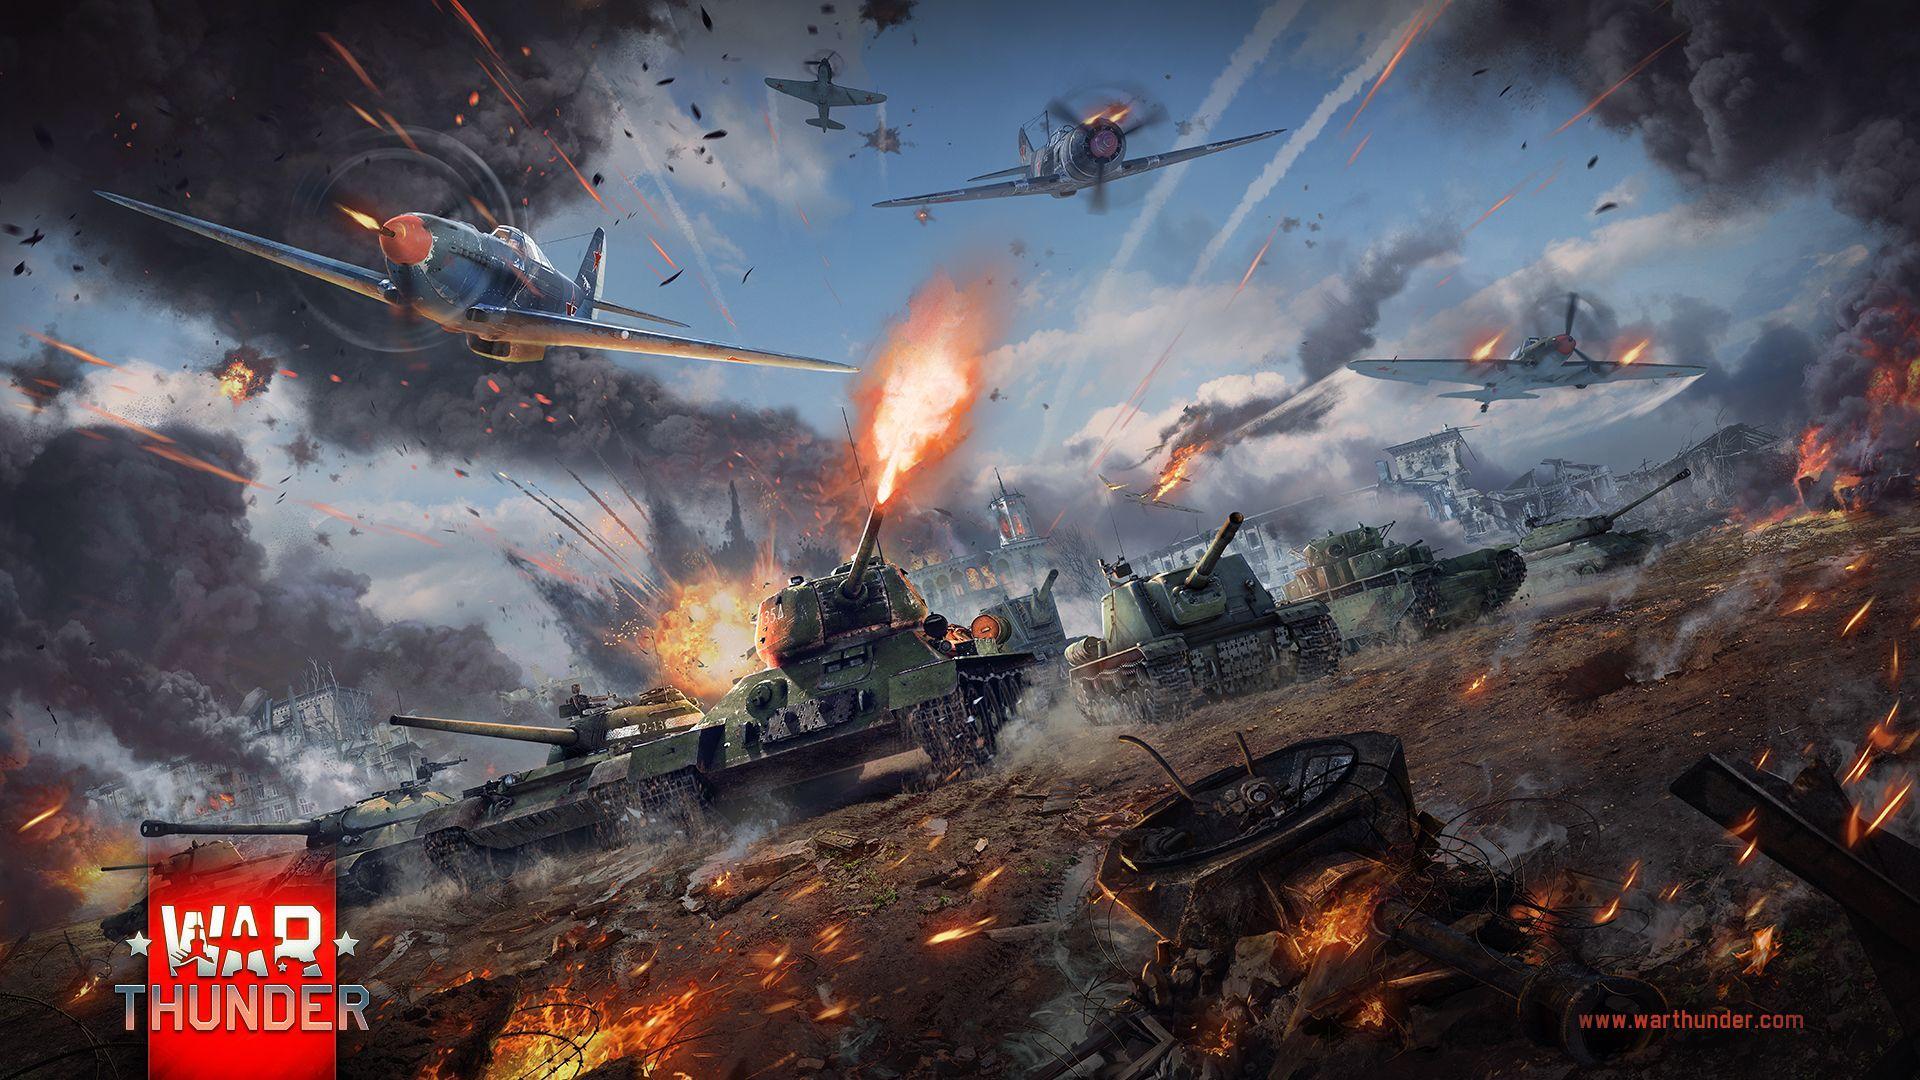 War Thunder Gen MMO Combat Game For PC, Mac, Linux